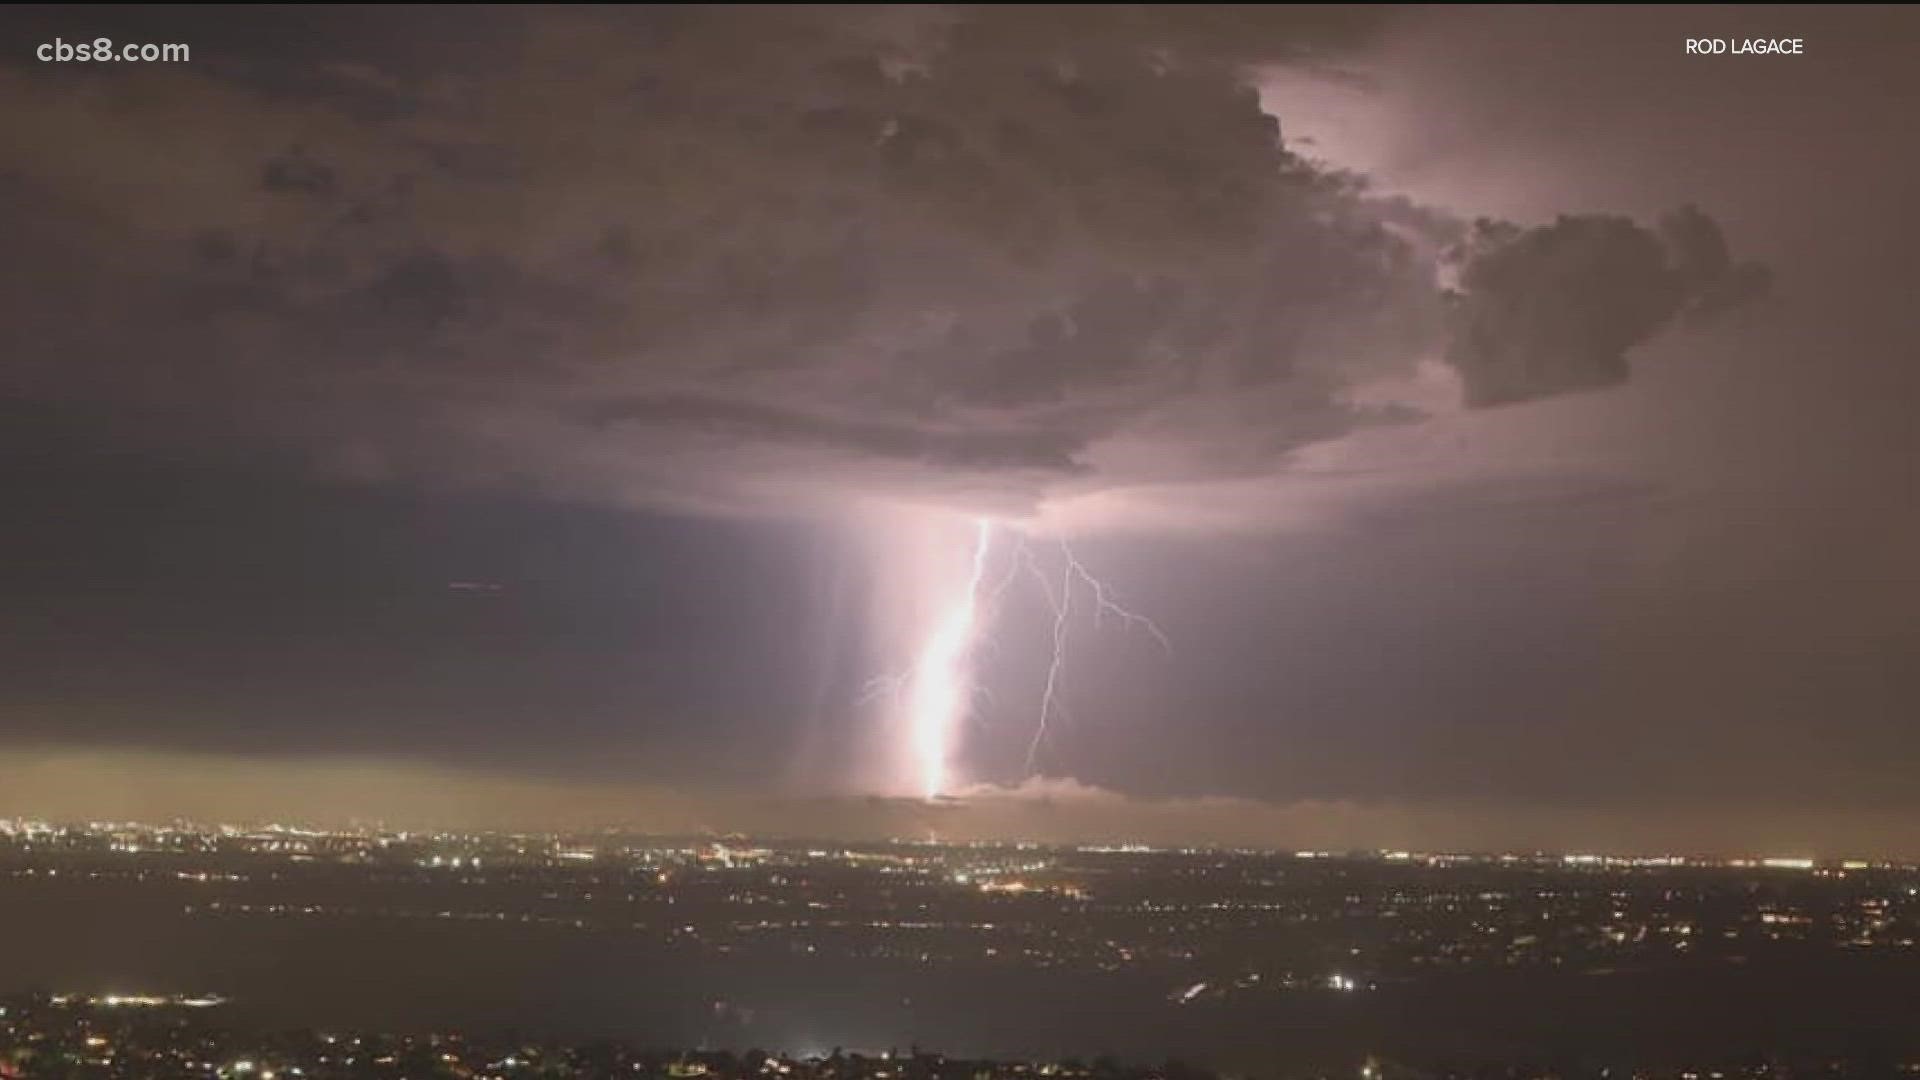 Photos and videos sent in of the amazing lightning seen across San Diego Thursday evening.